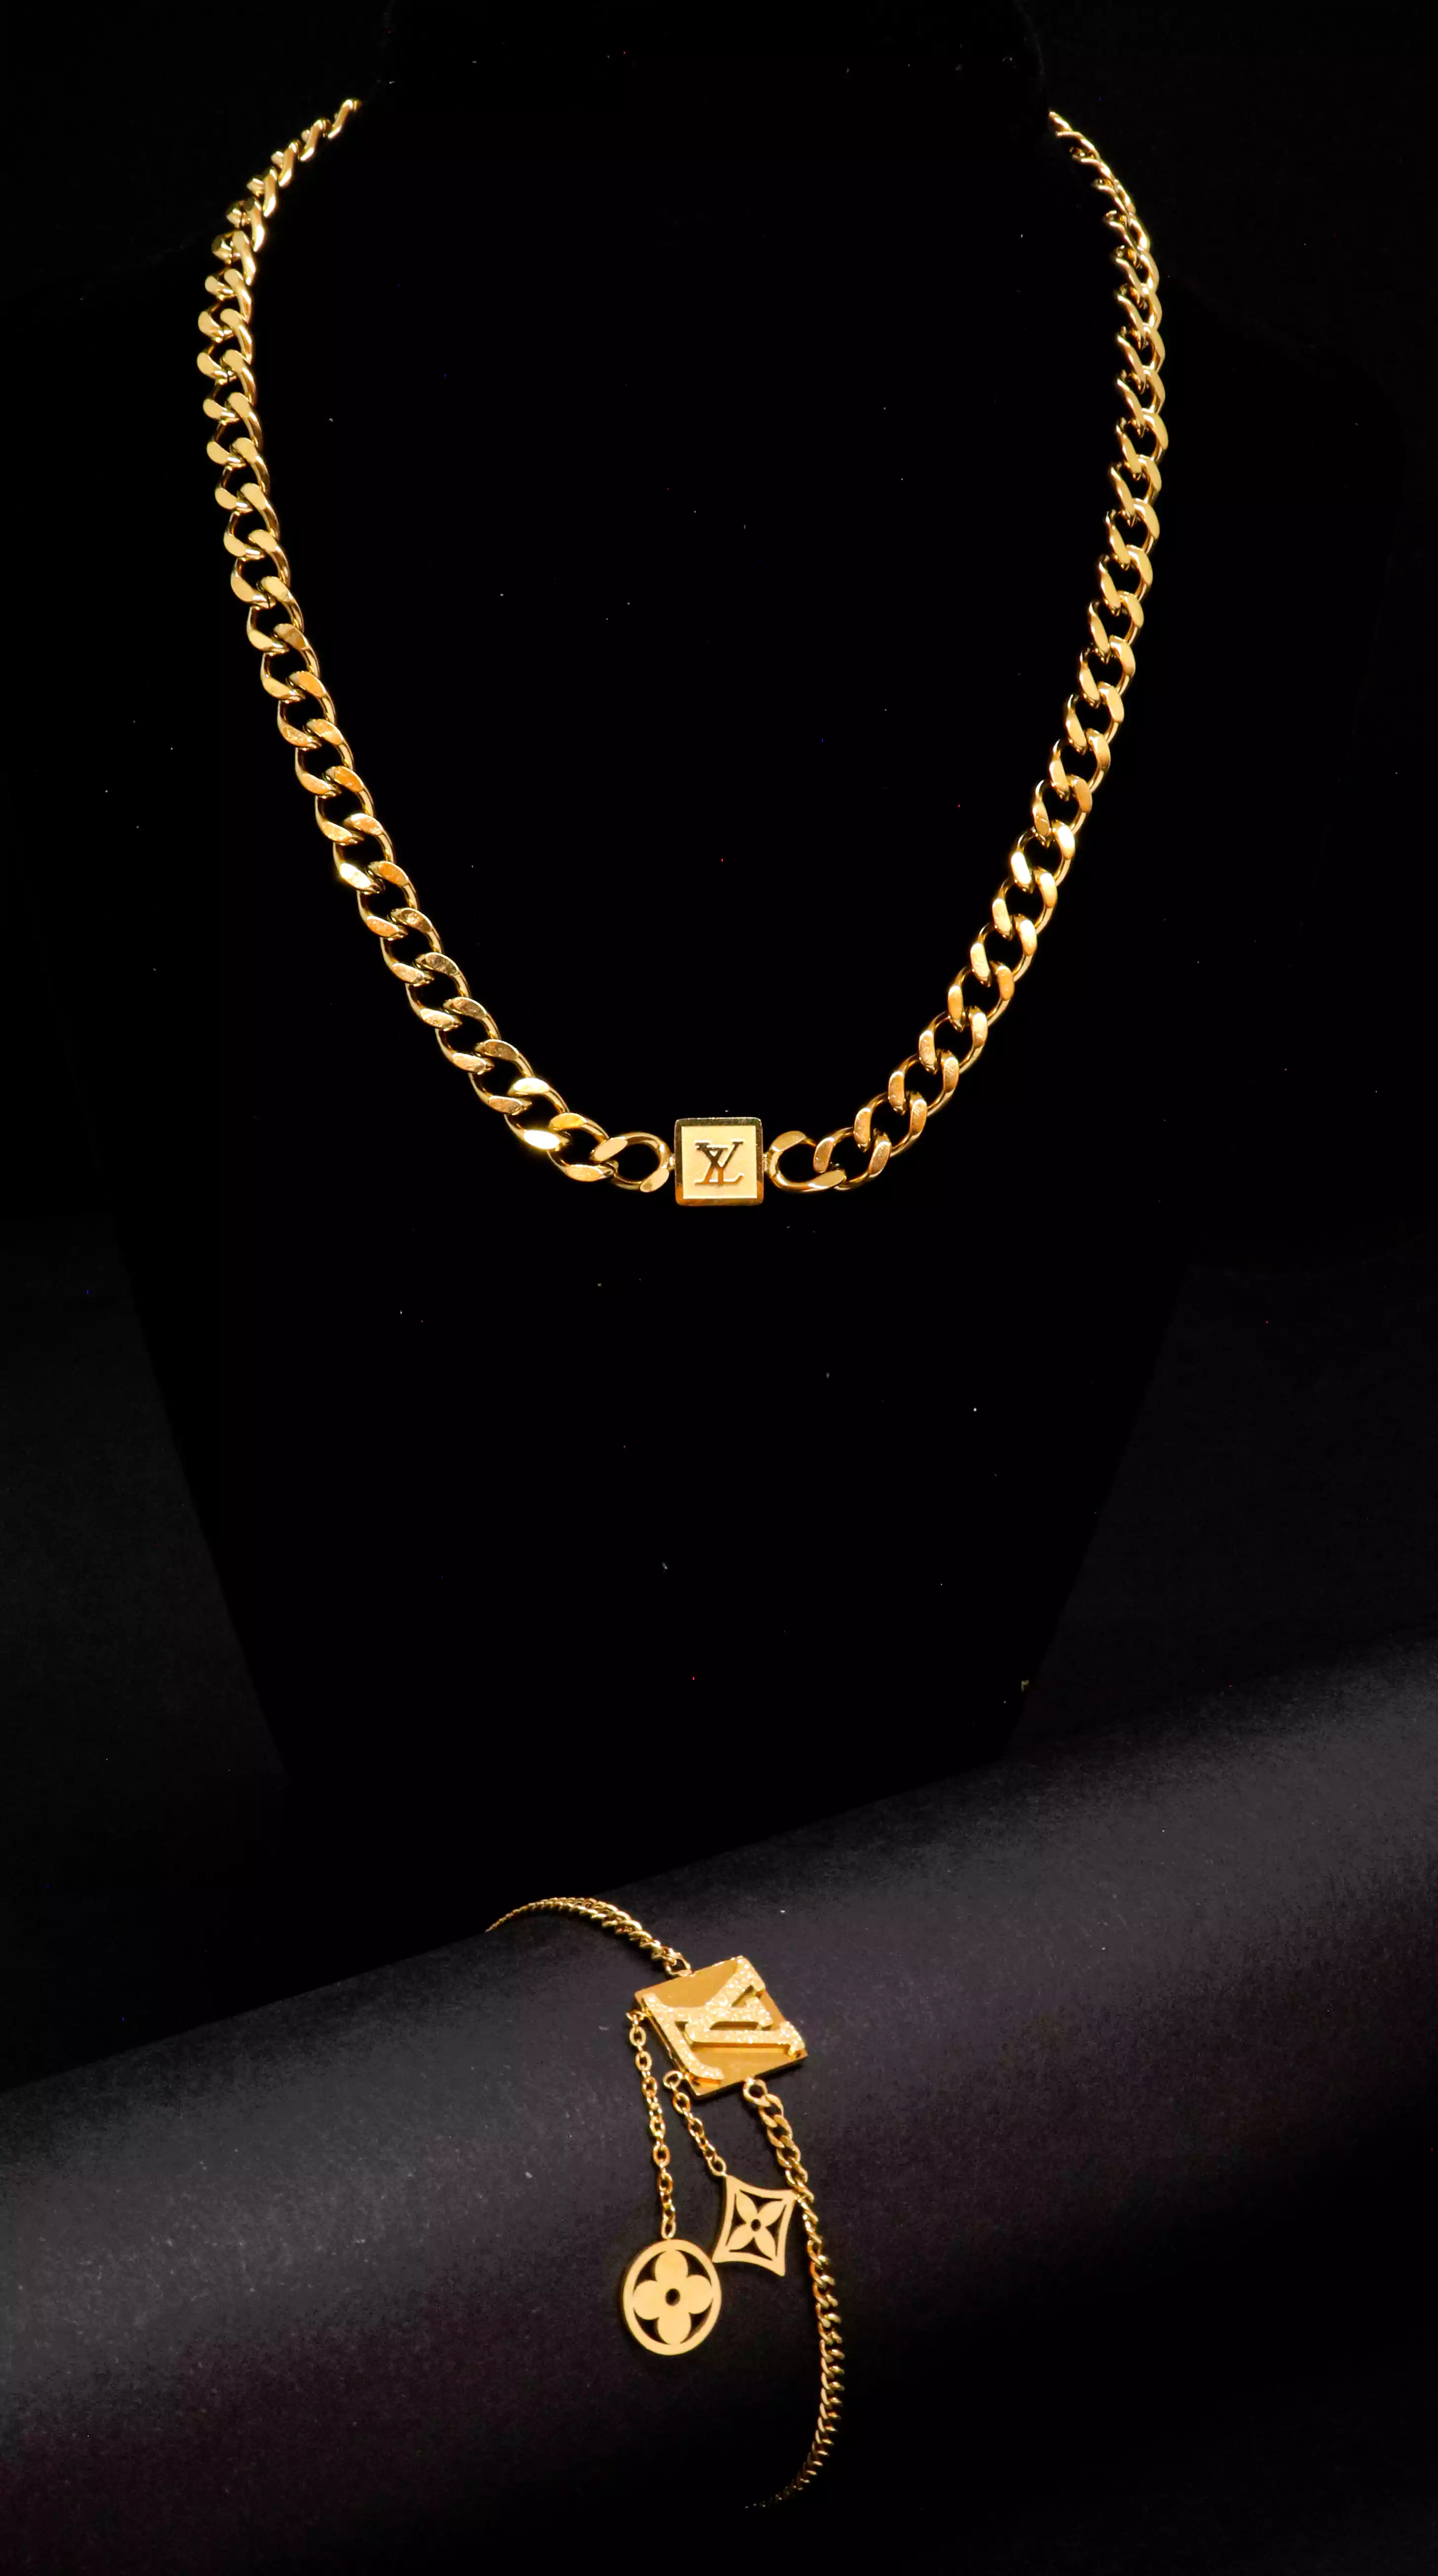 Gold Louis Vuitton Jewelry Set, Necklace and Chain for Women and Girls, LV2  Elghazawy Shop